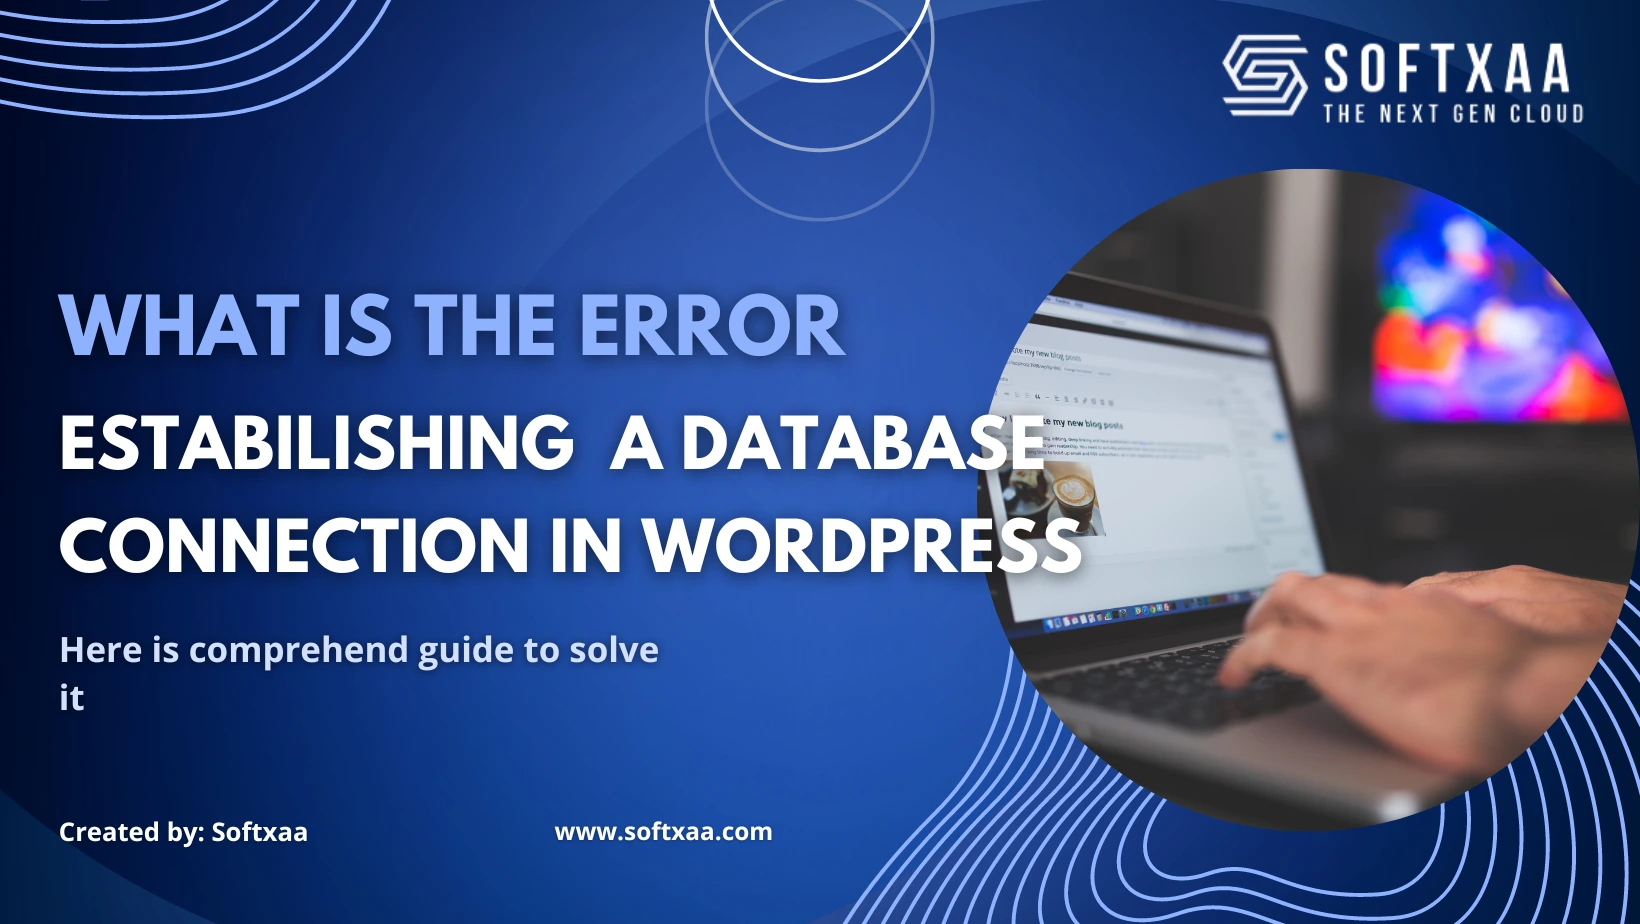 What is the error establishing a database connection in WordPress